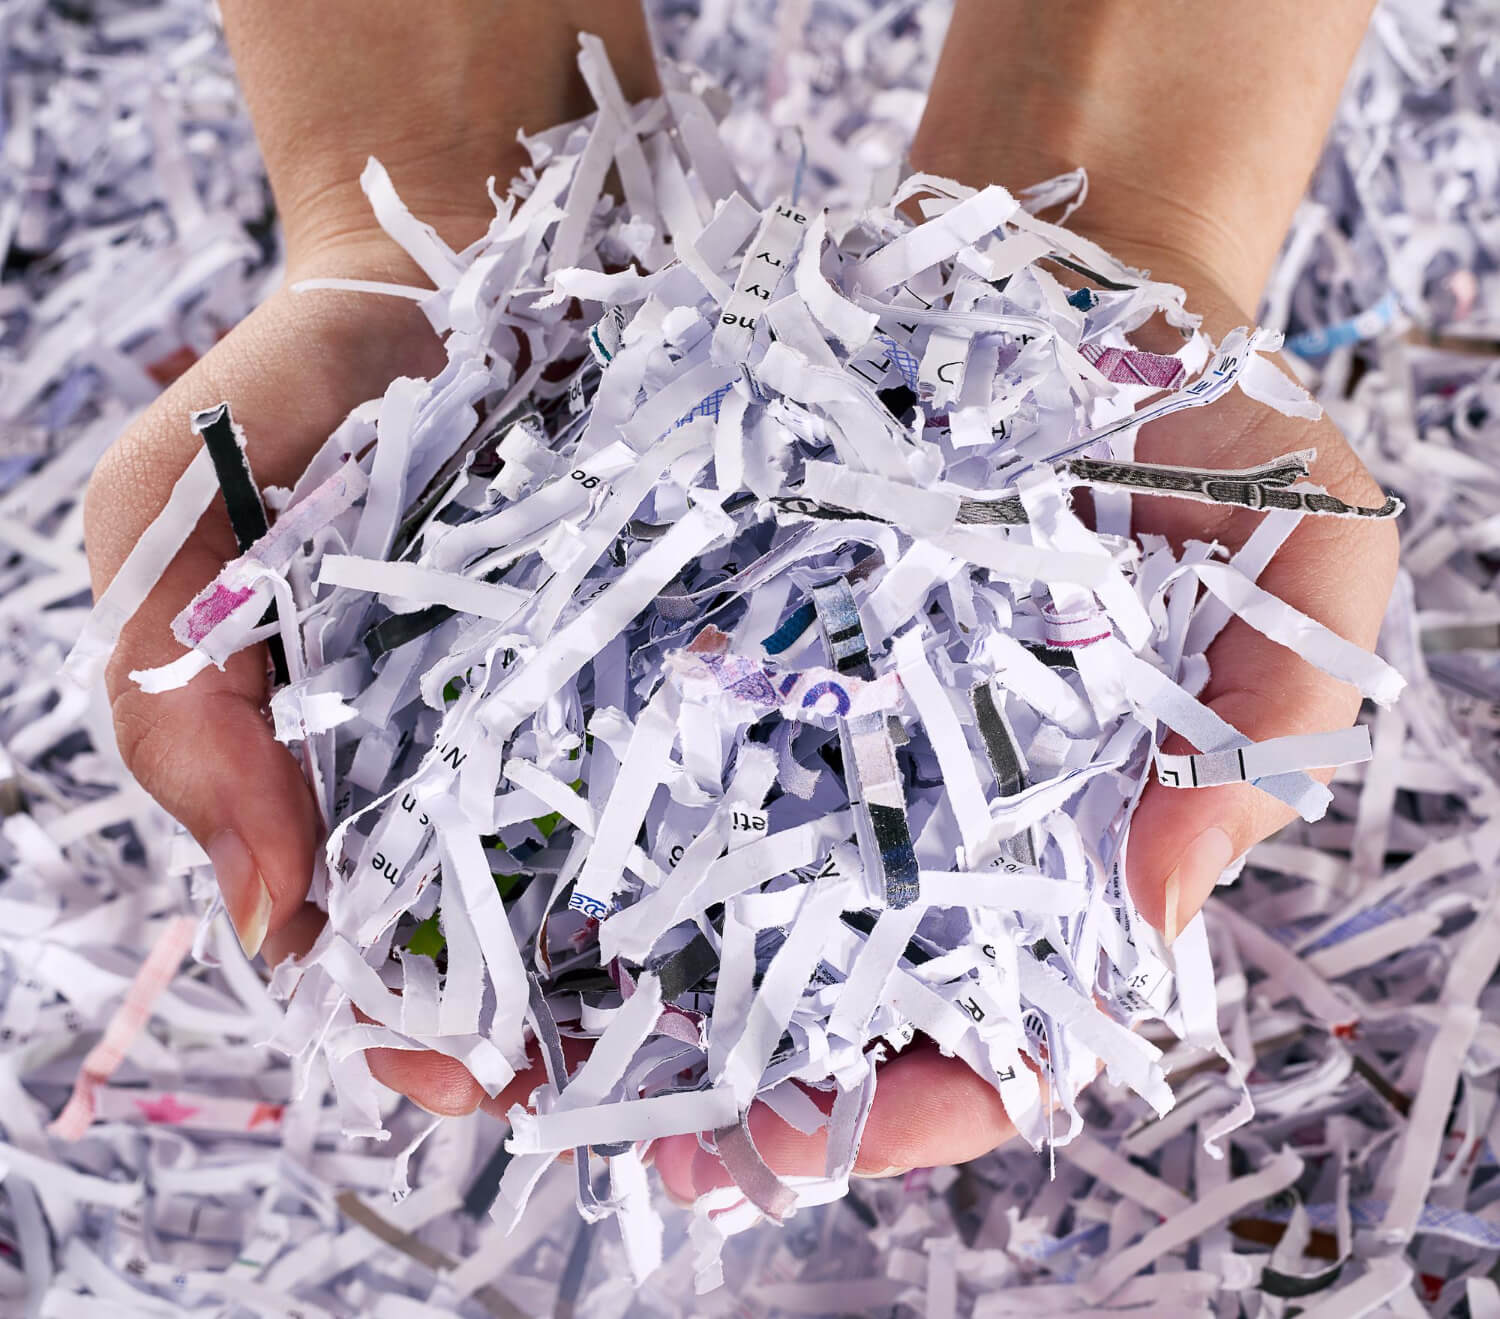 this-is-only-evidence-thats-left-studio-shot-womans-hands-holding-pile-shredded-paper